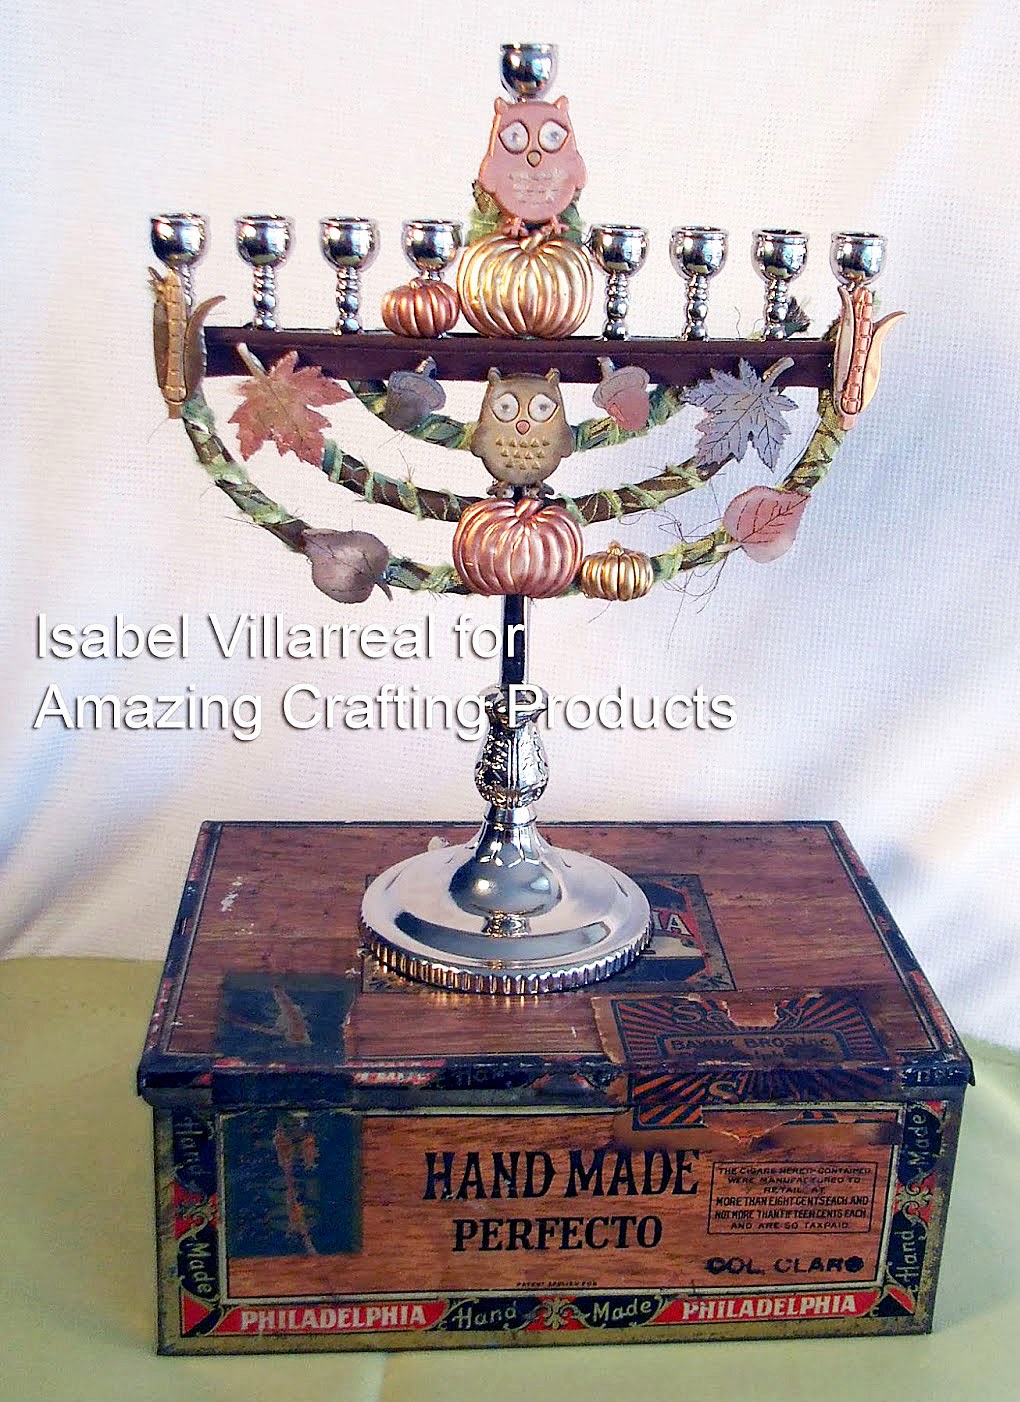 The Remarkerable Menorah – Crafts by Esther O